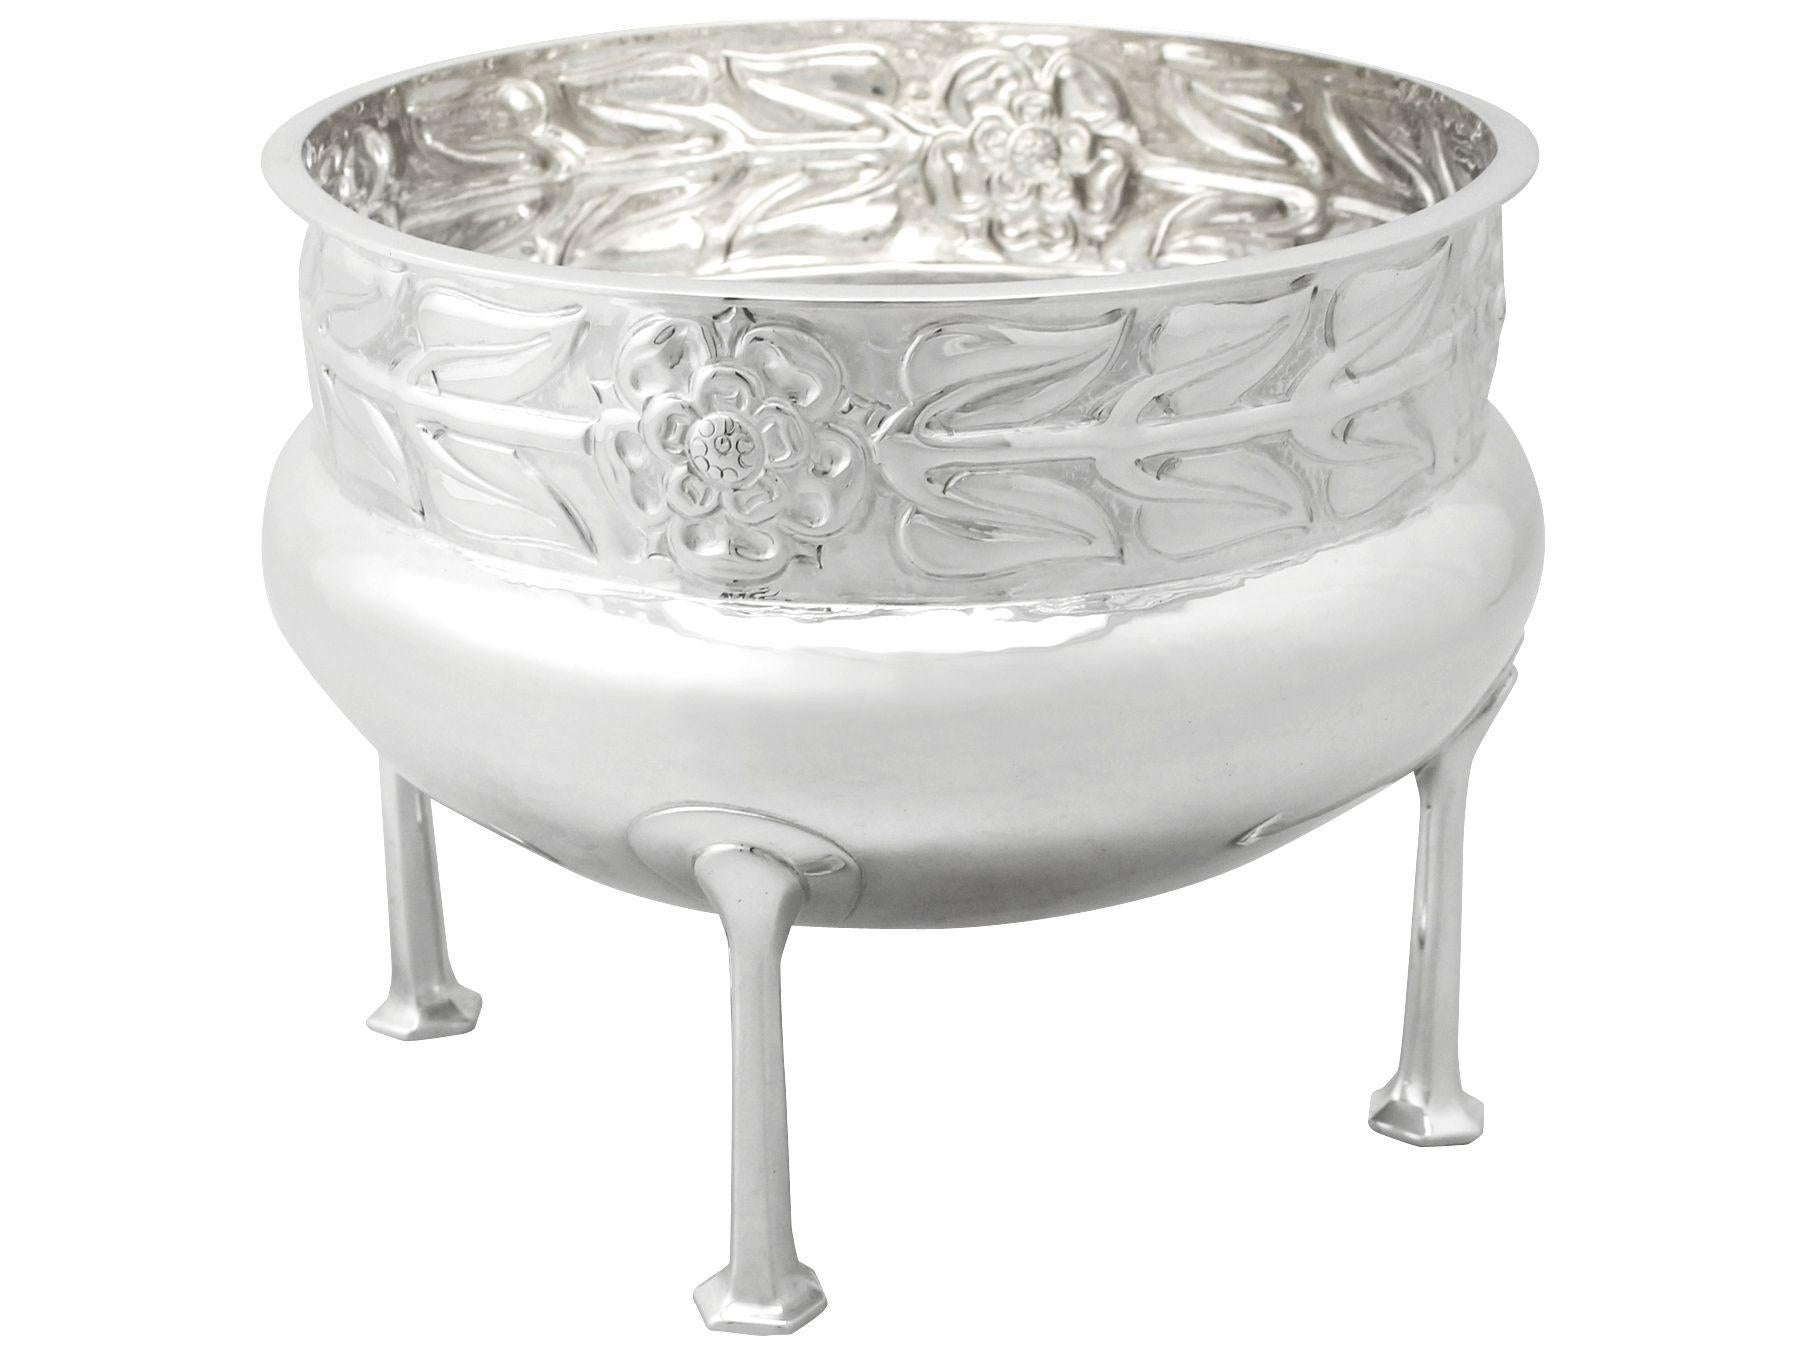 An exceptional, fine and impressive antique George V English sterling silver jardinière or bowl made by A E Jones in the Arts & Crafts style, an addition to our range of collectable silverware.

This fine antique George V sterling silver